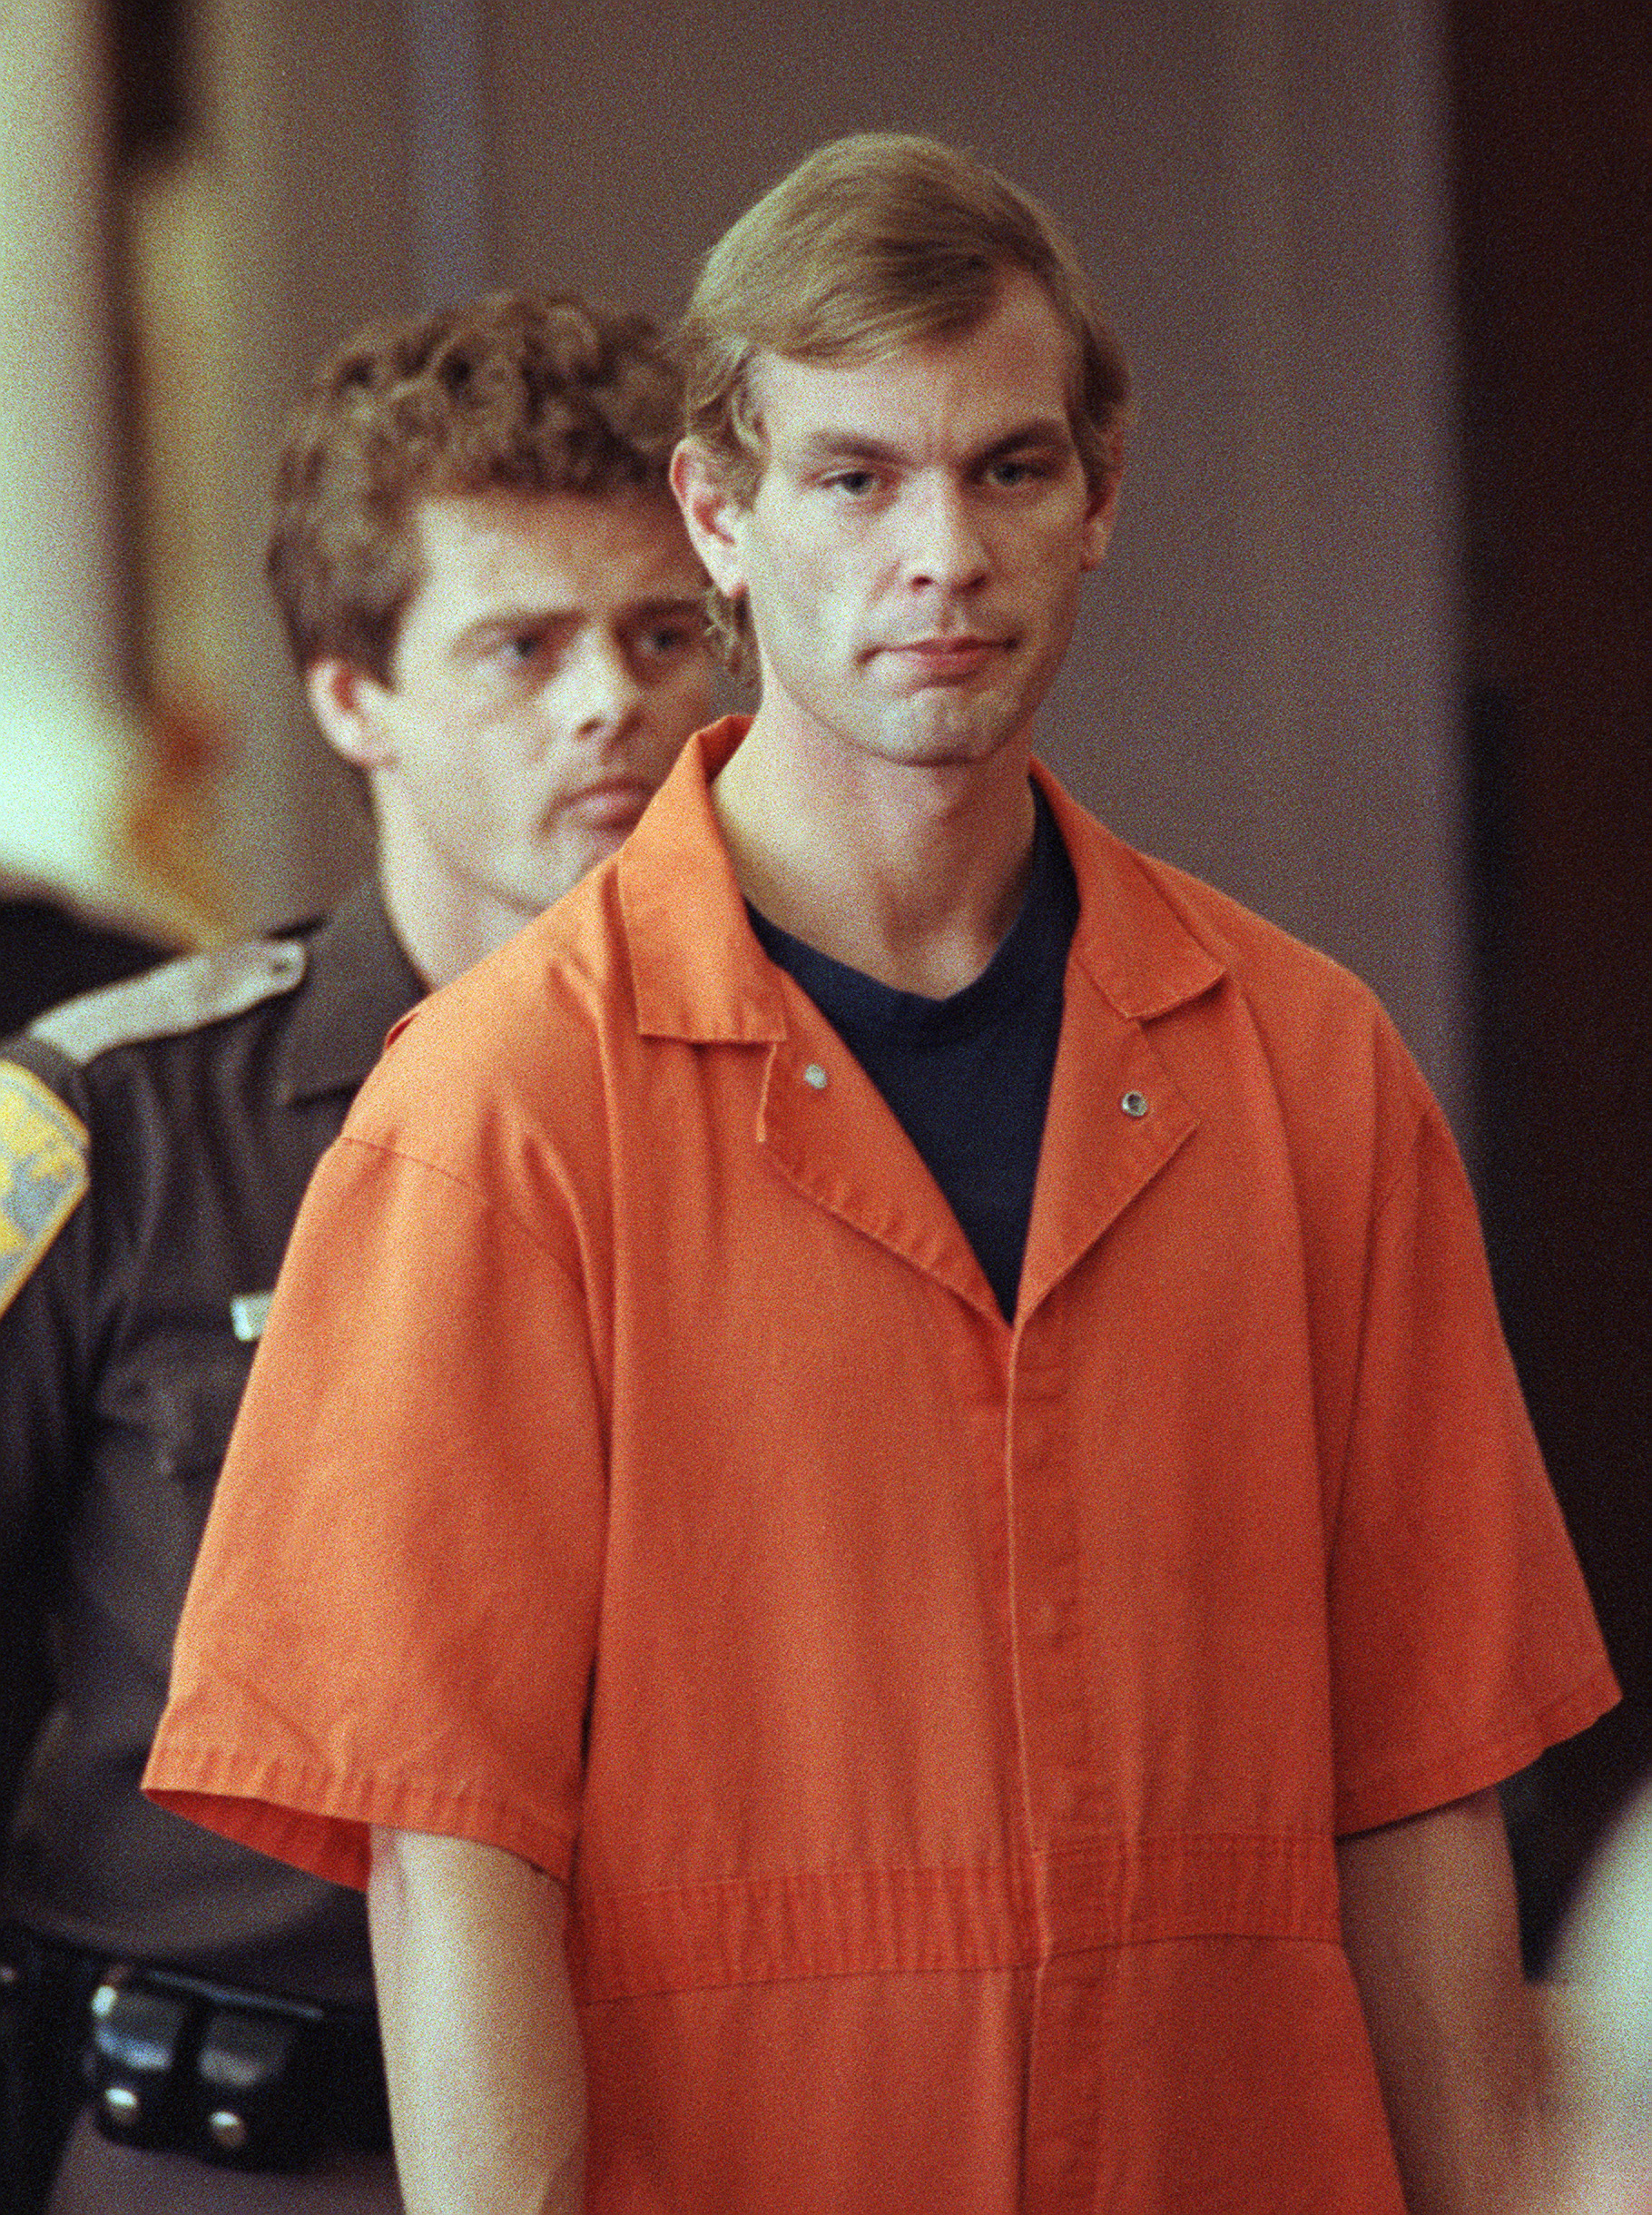 Jeffrey Dahmer entering a courtroom on August 6,1991. | Source: Getty Images